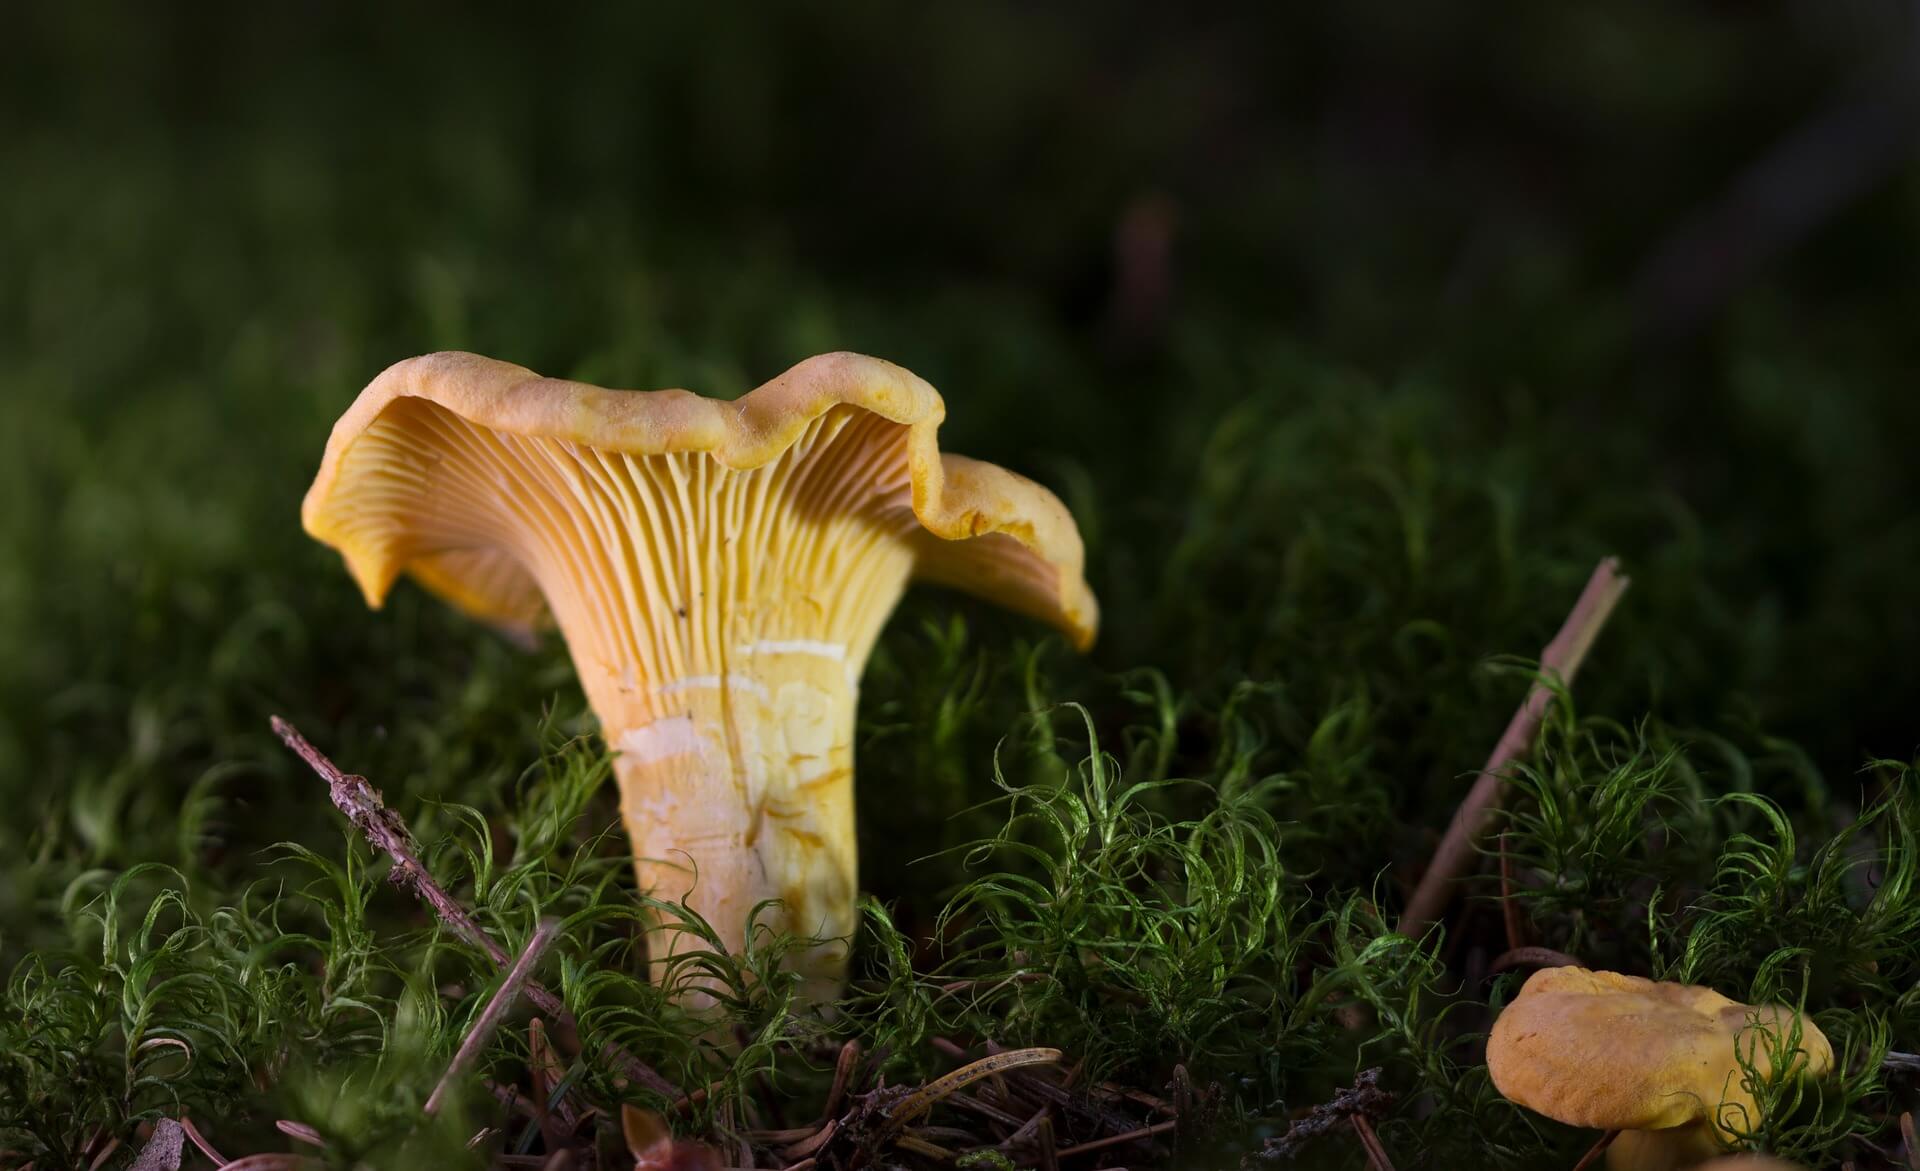 where do chanterelle mushrooms grow in the US